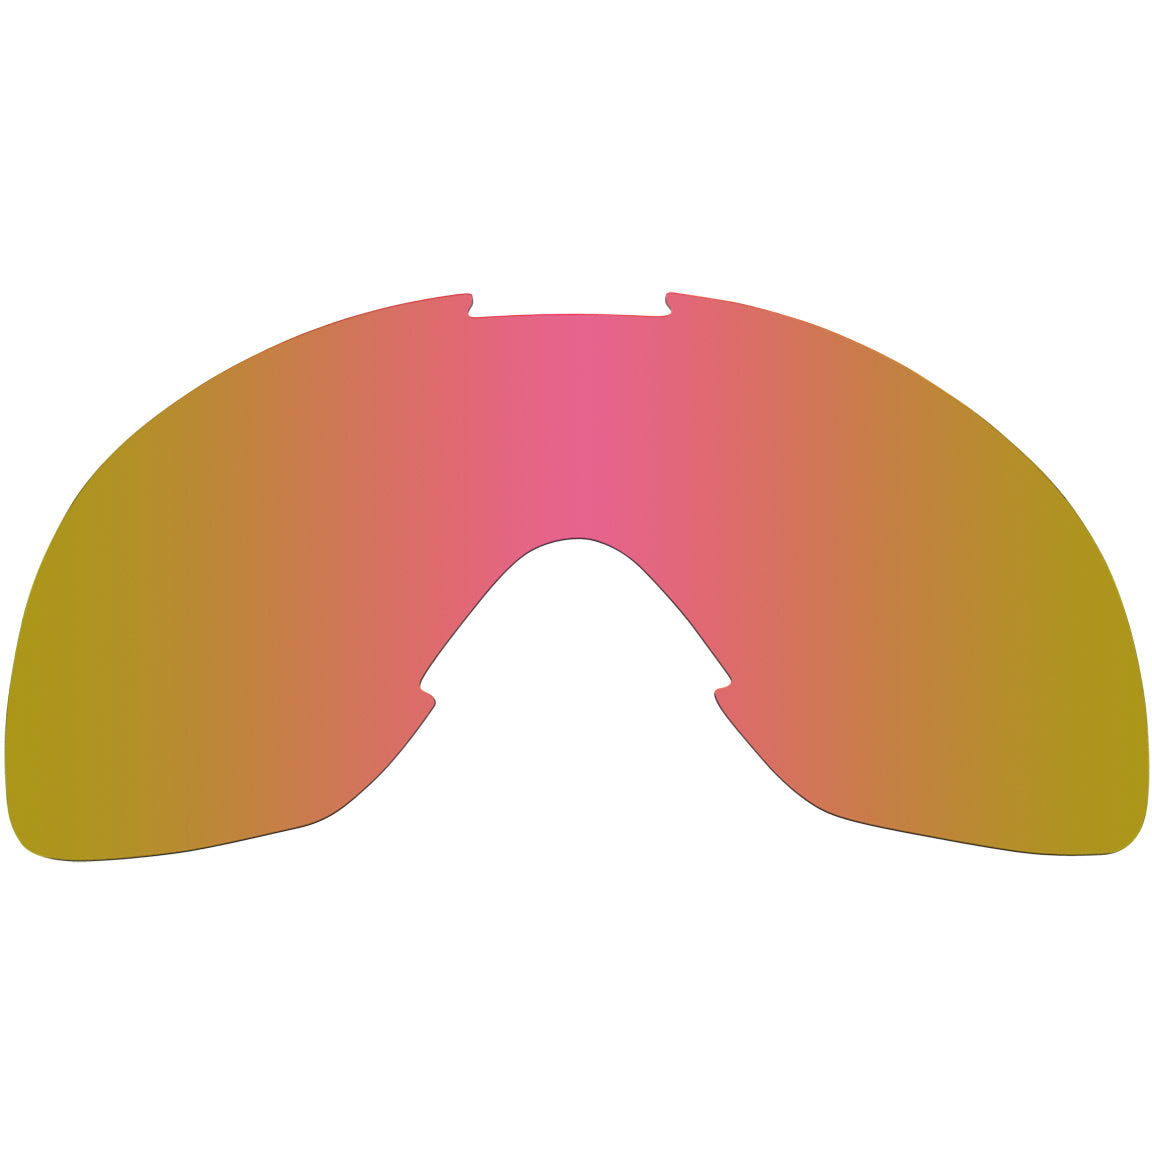 Overland 2.0 Goggle Lens - Pink Mirror / Brown